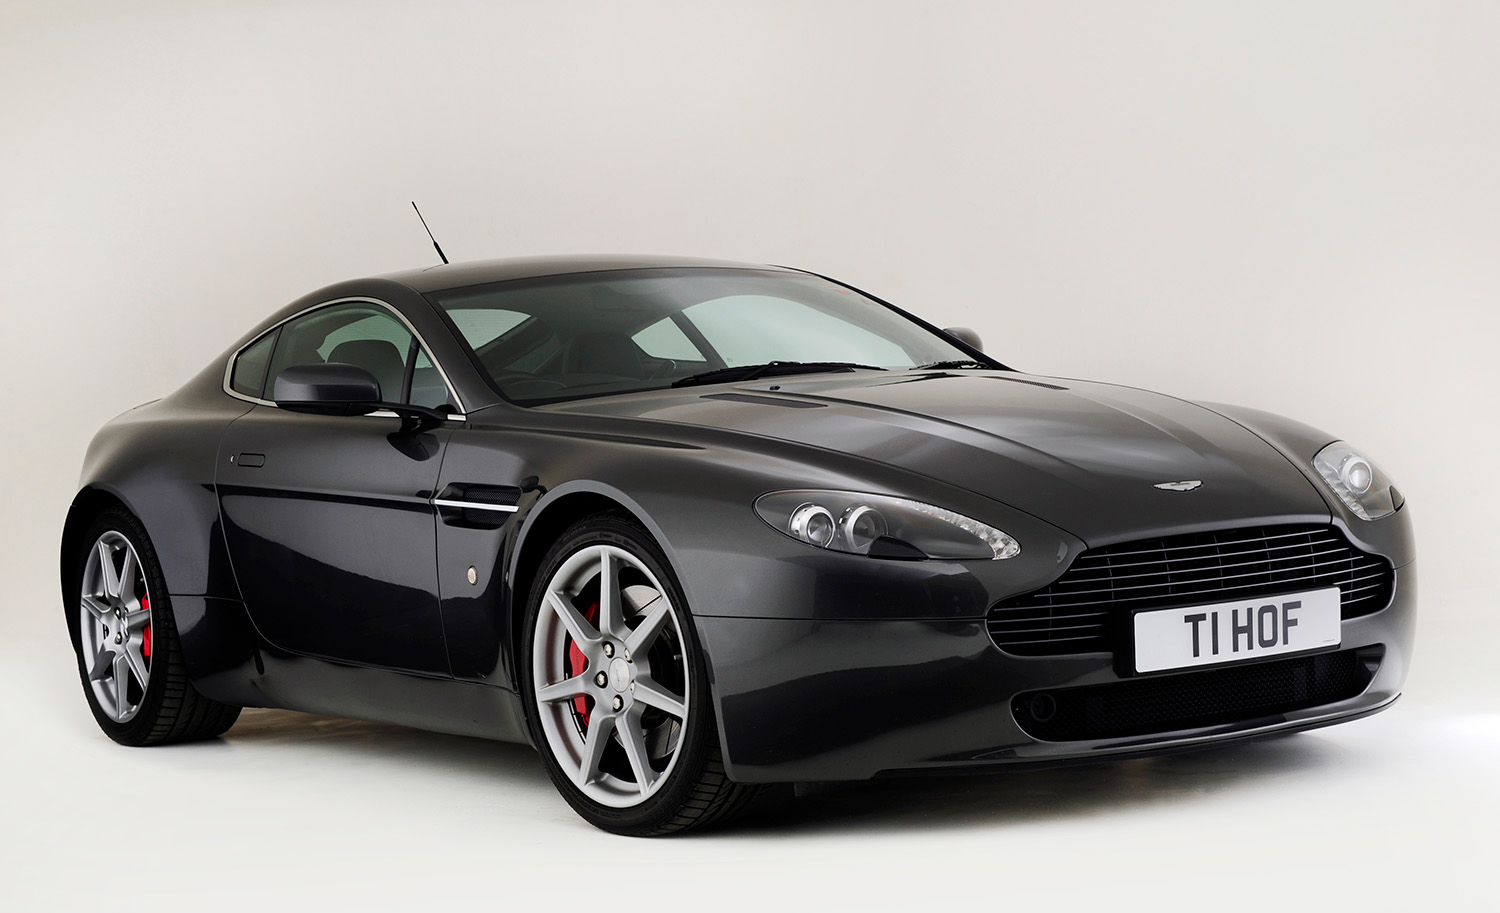 Silver Aston Martin V8 Vantage, one of the most attainable supecars and/or exotic cars in the world